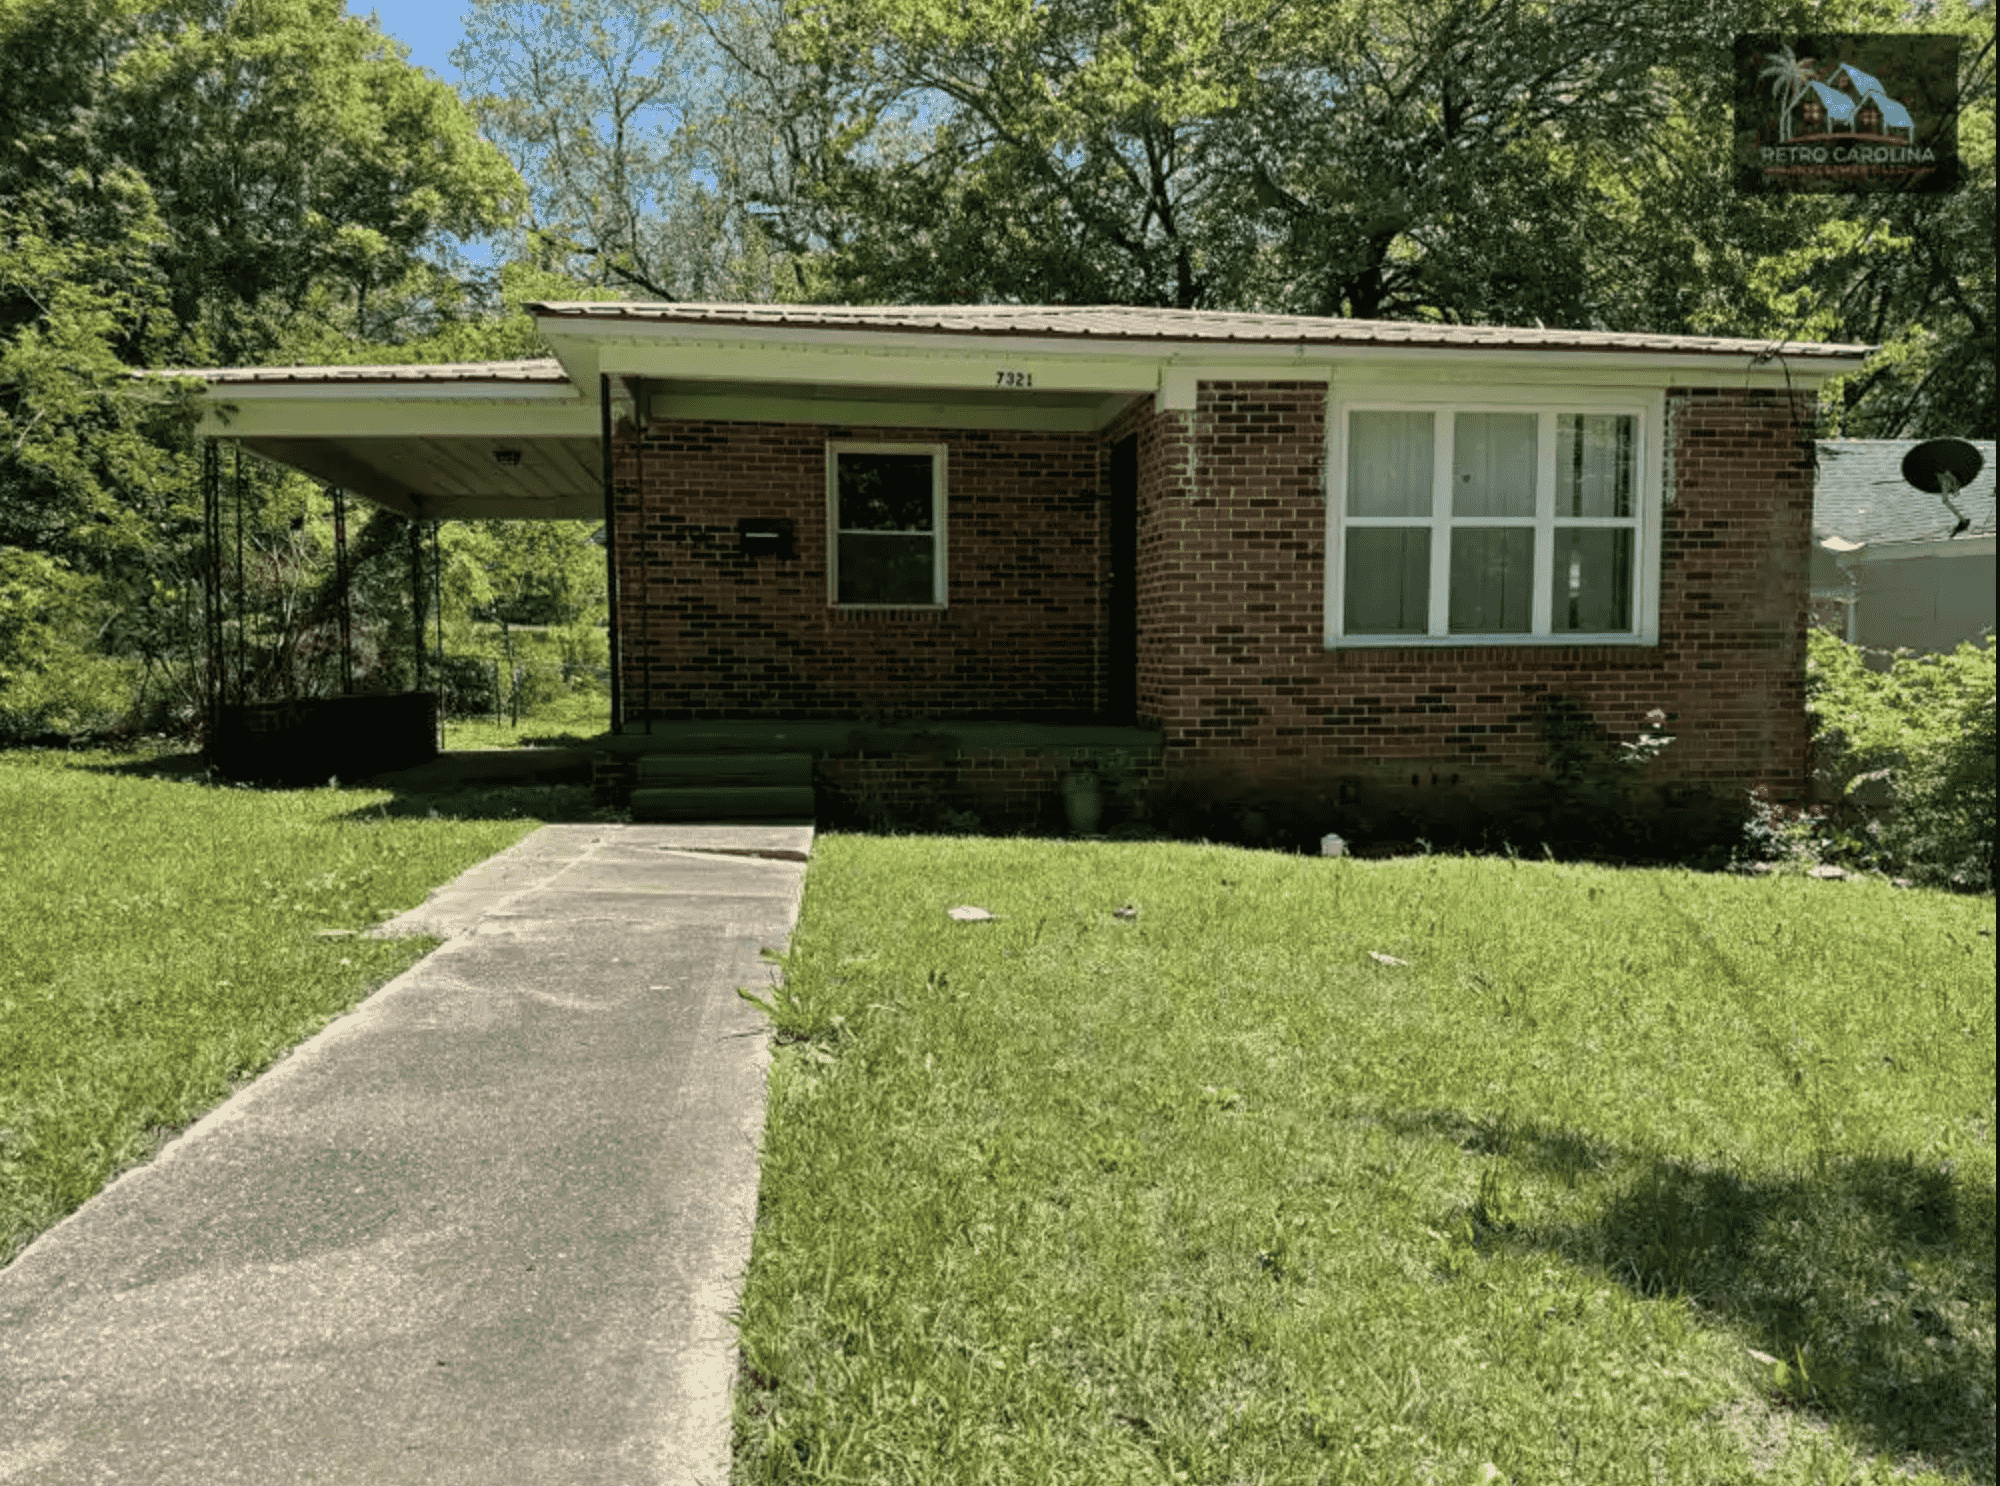 Picture of 70 N Dundalk Ave, Dundalk, MD 21222, USA